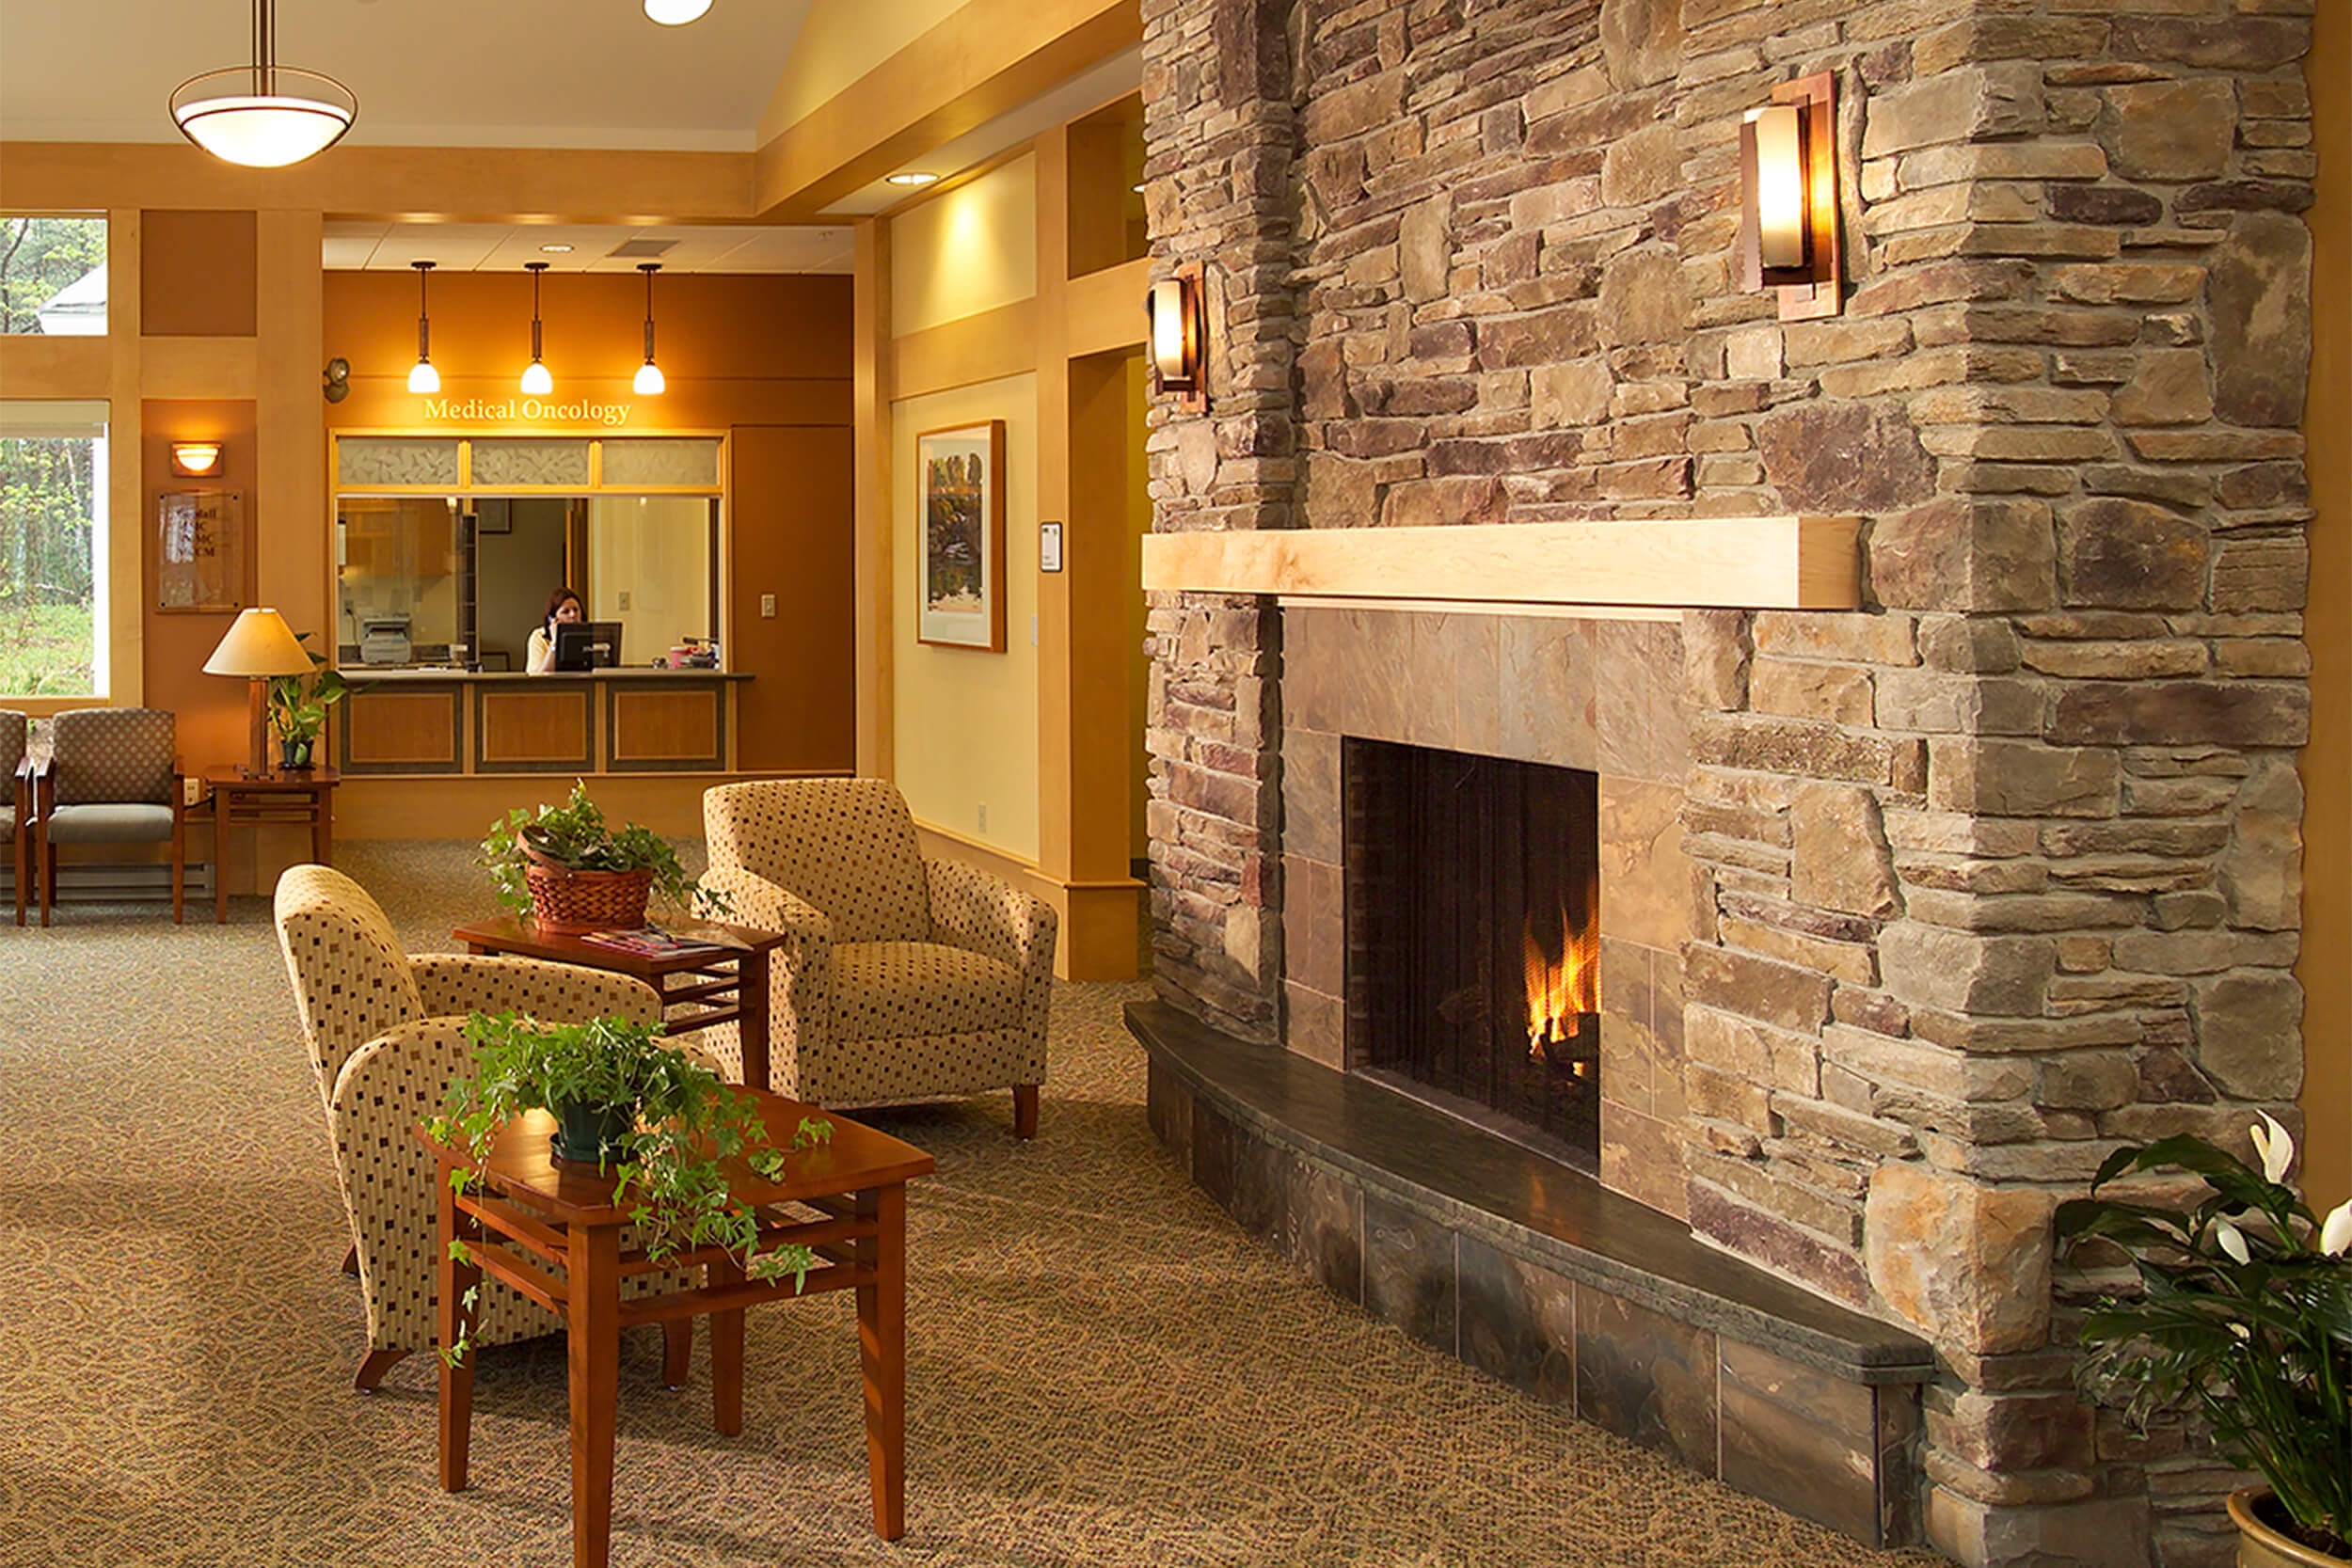 Interior photo of a waiting area at an oncology treatment center. A stone fireplace is seen in the foreground with two comfortable chairs and end tables facing it, and further in the background a wood paneled reception desk area can be seen.